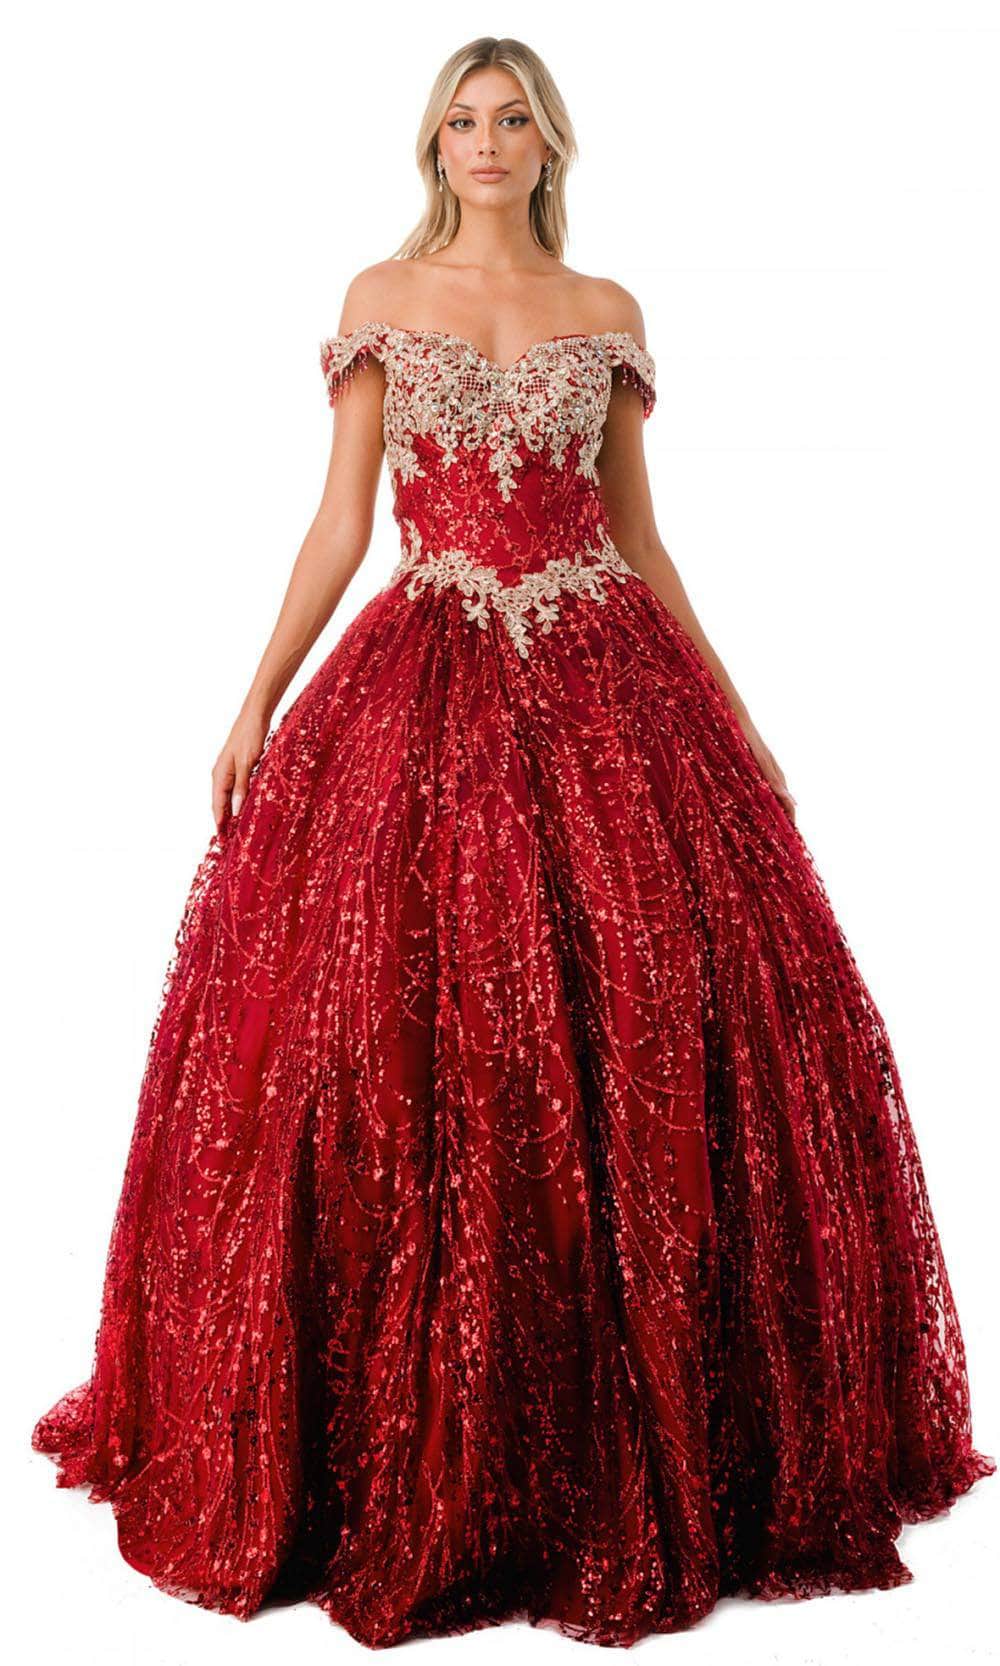 Image of Aspeed Design L2364 - Sweetheart Lace-Up Glitter Ballgown